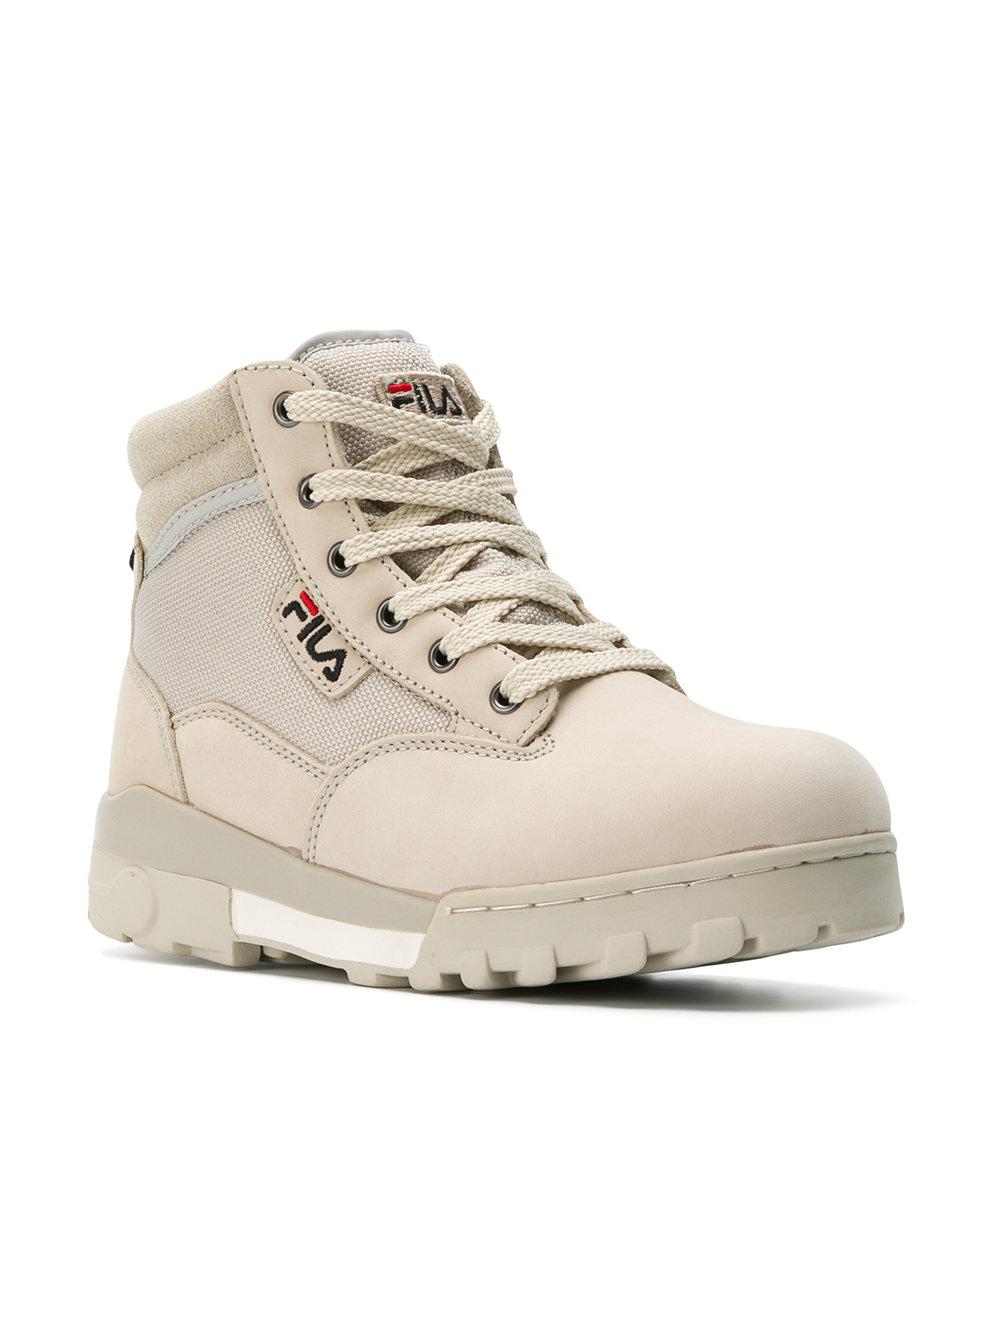 Fila Leather Grunge Mid Boots in Natural -